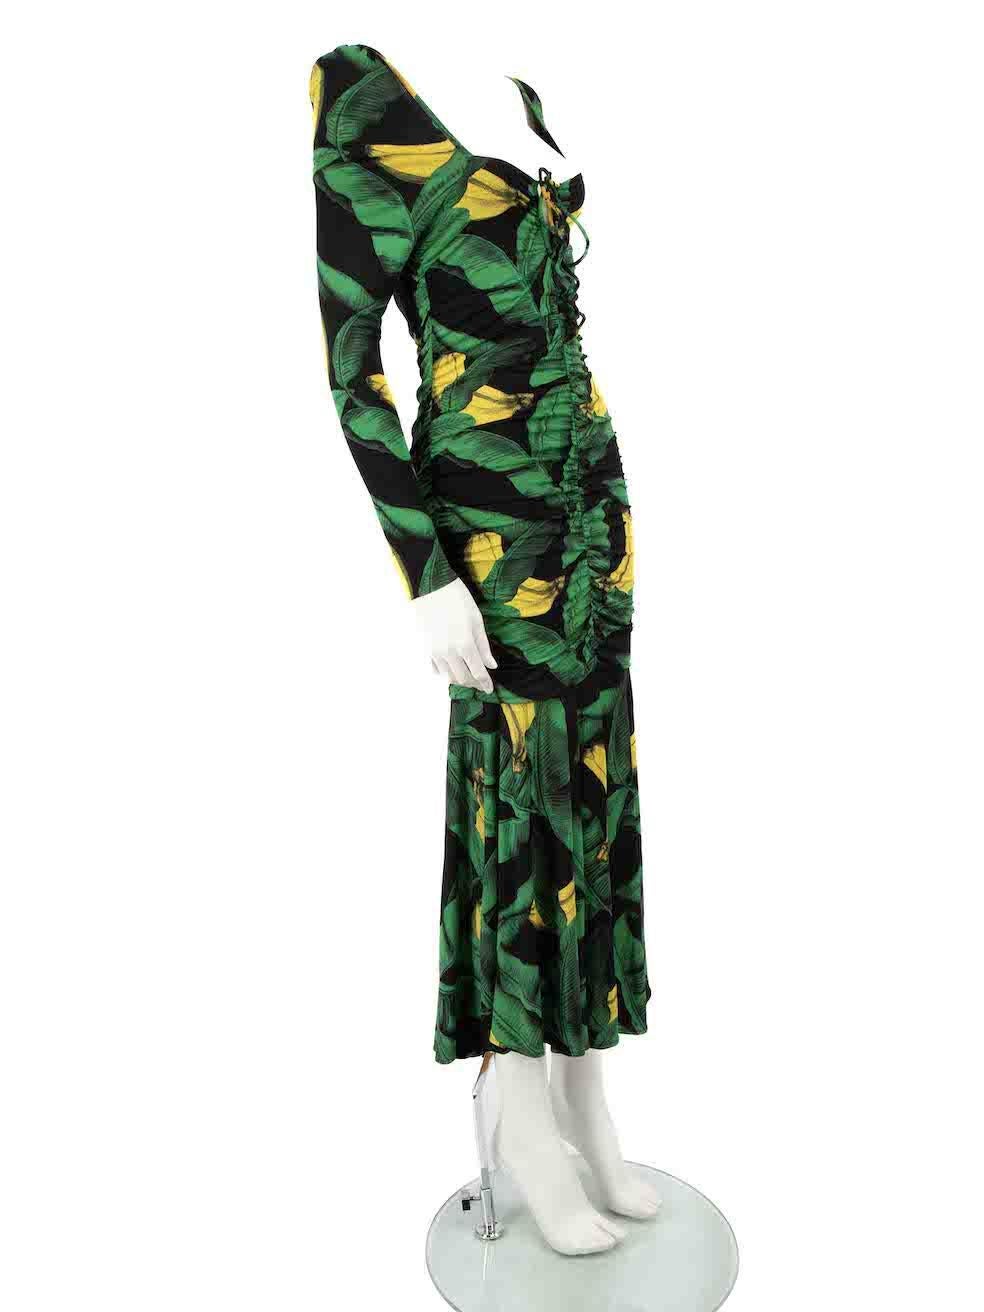 CONDITION is Never worn, with tags. No visible wear to dress is evident on this new Ganni designer resale item.
 
 Details
 Multicolour- green and yellow
 Viscose
 Dress
 Leaf print
 Long sleeves
 Ruched
 Figure hugging fit
 Midi
 Back zip